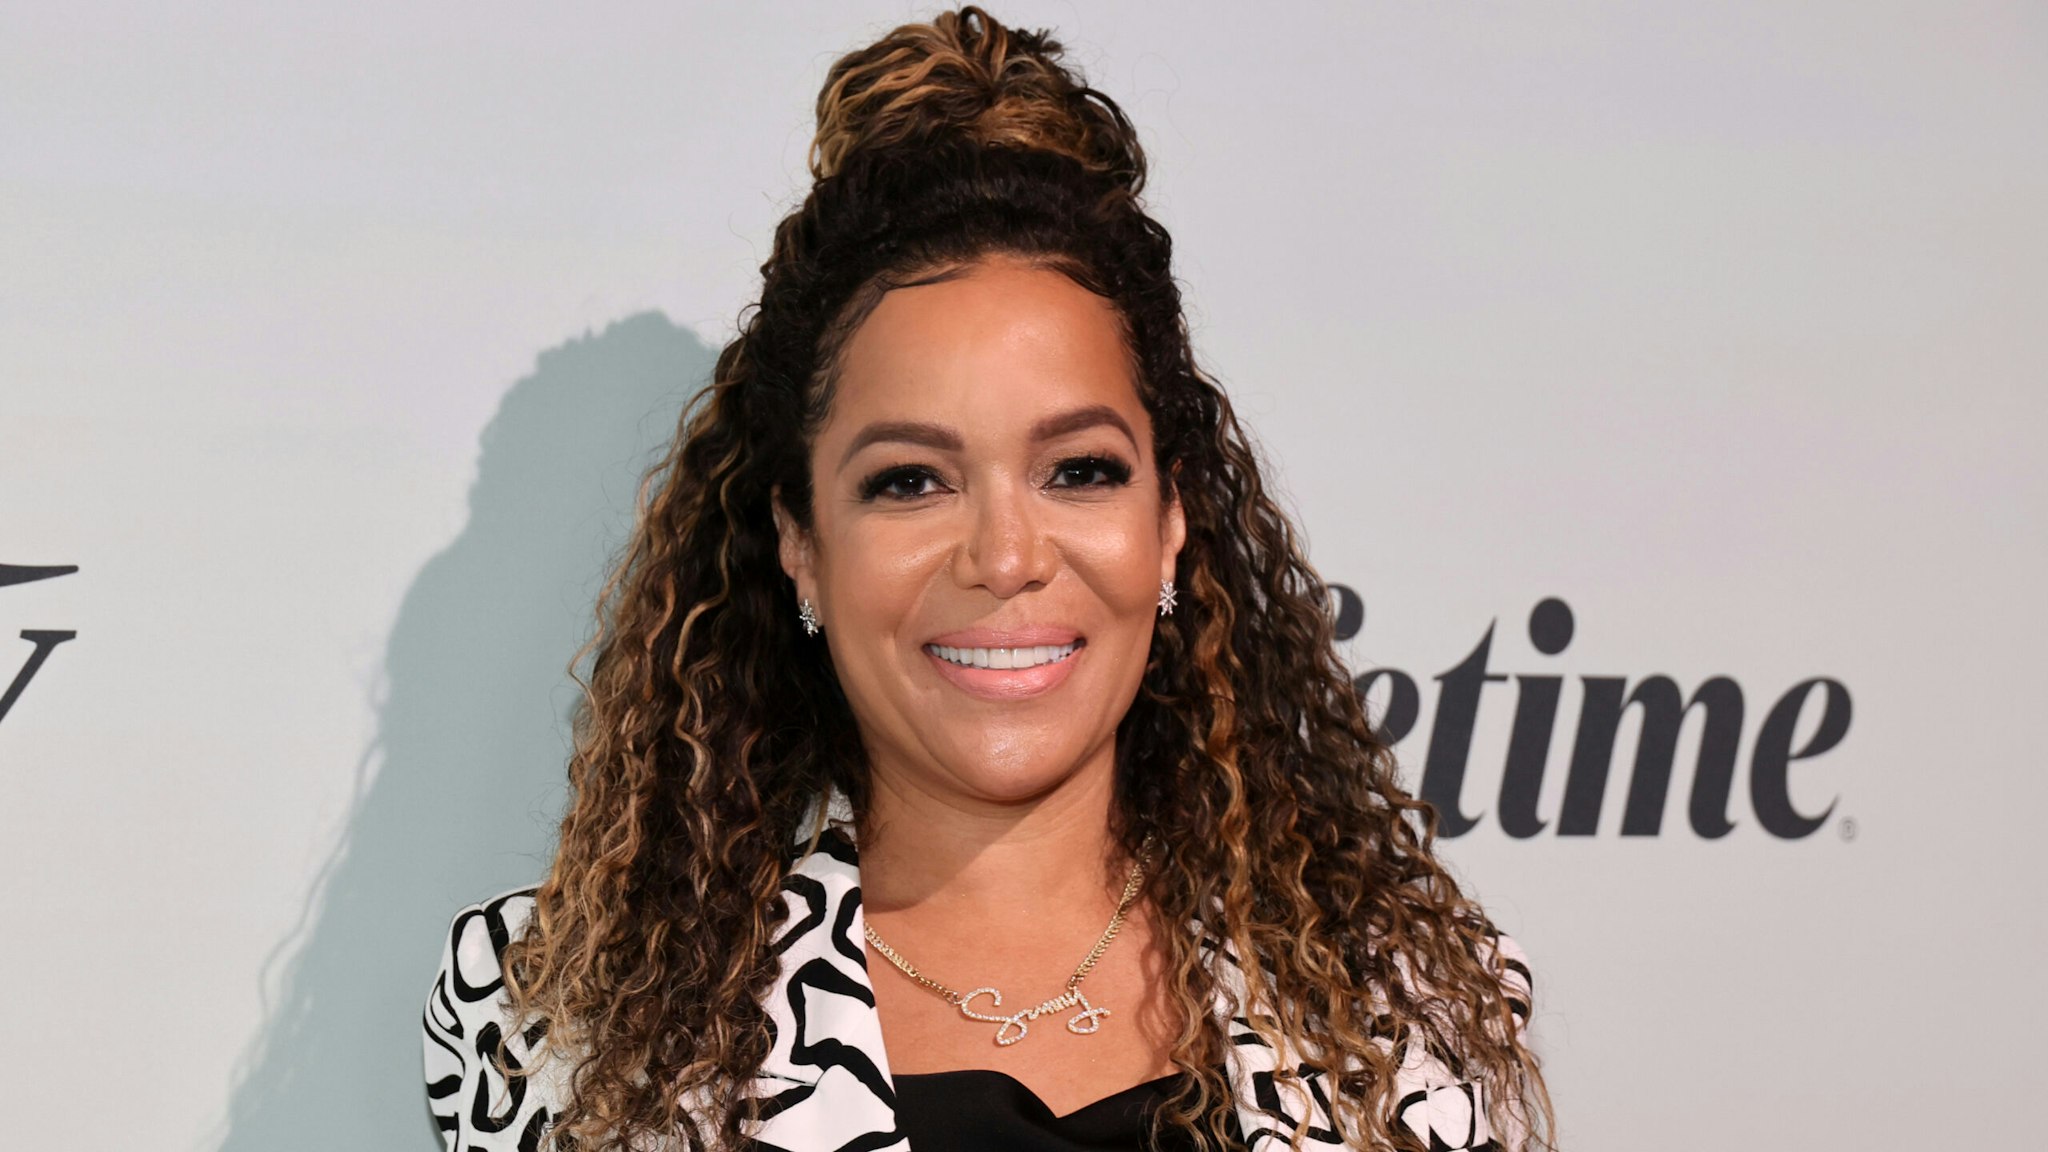 Sunny Hostin attends Variety's 2022 Power Of Women at The Glasshouse on May 05, 2022 in New York City.